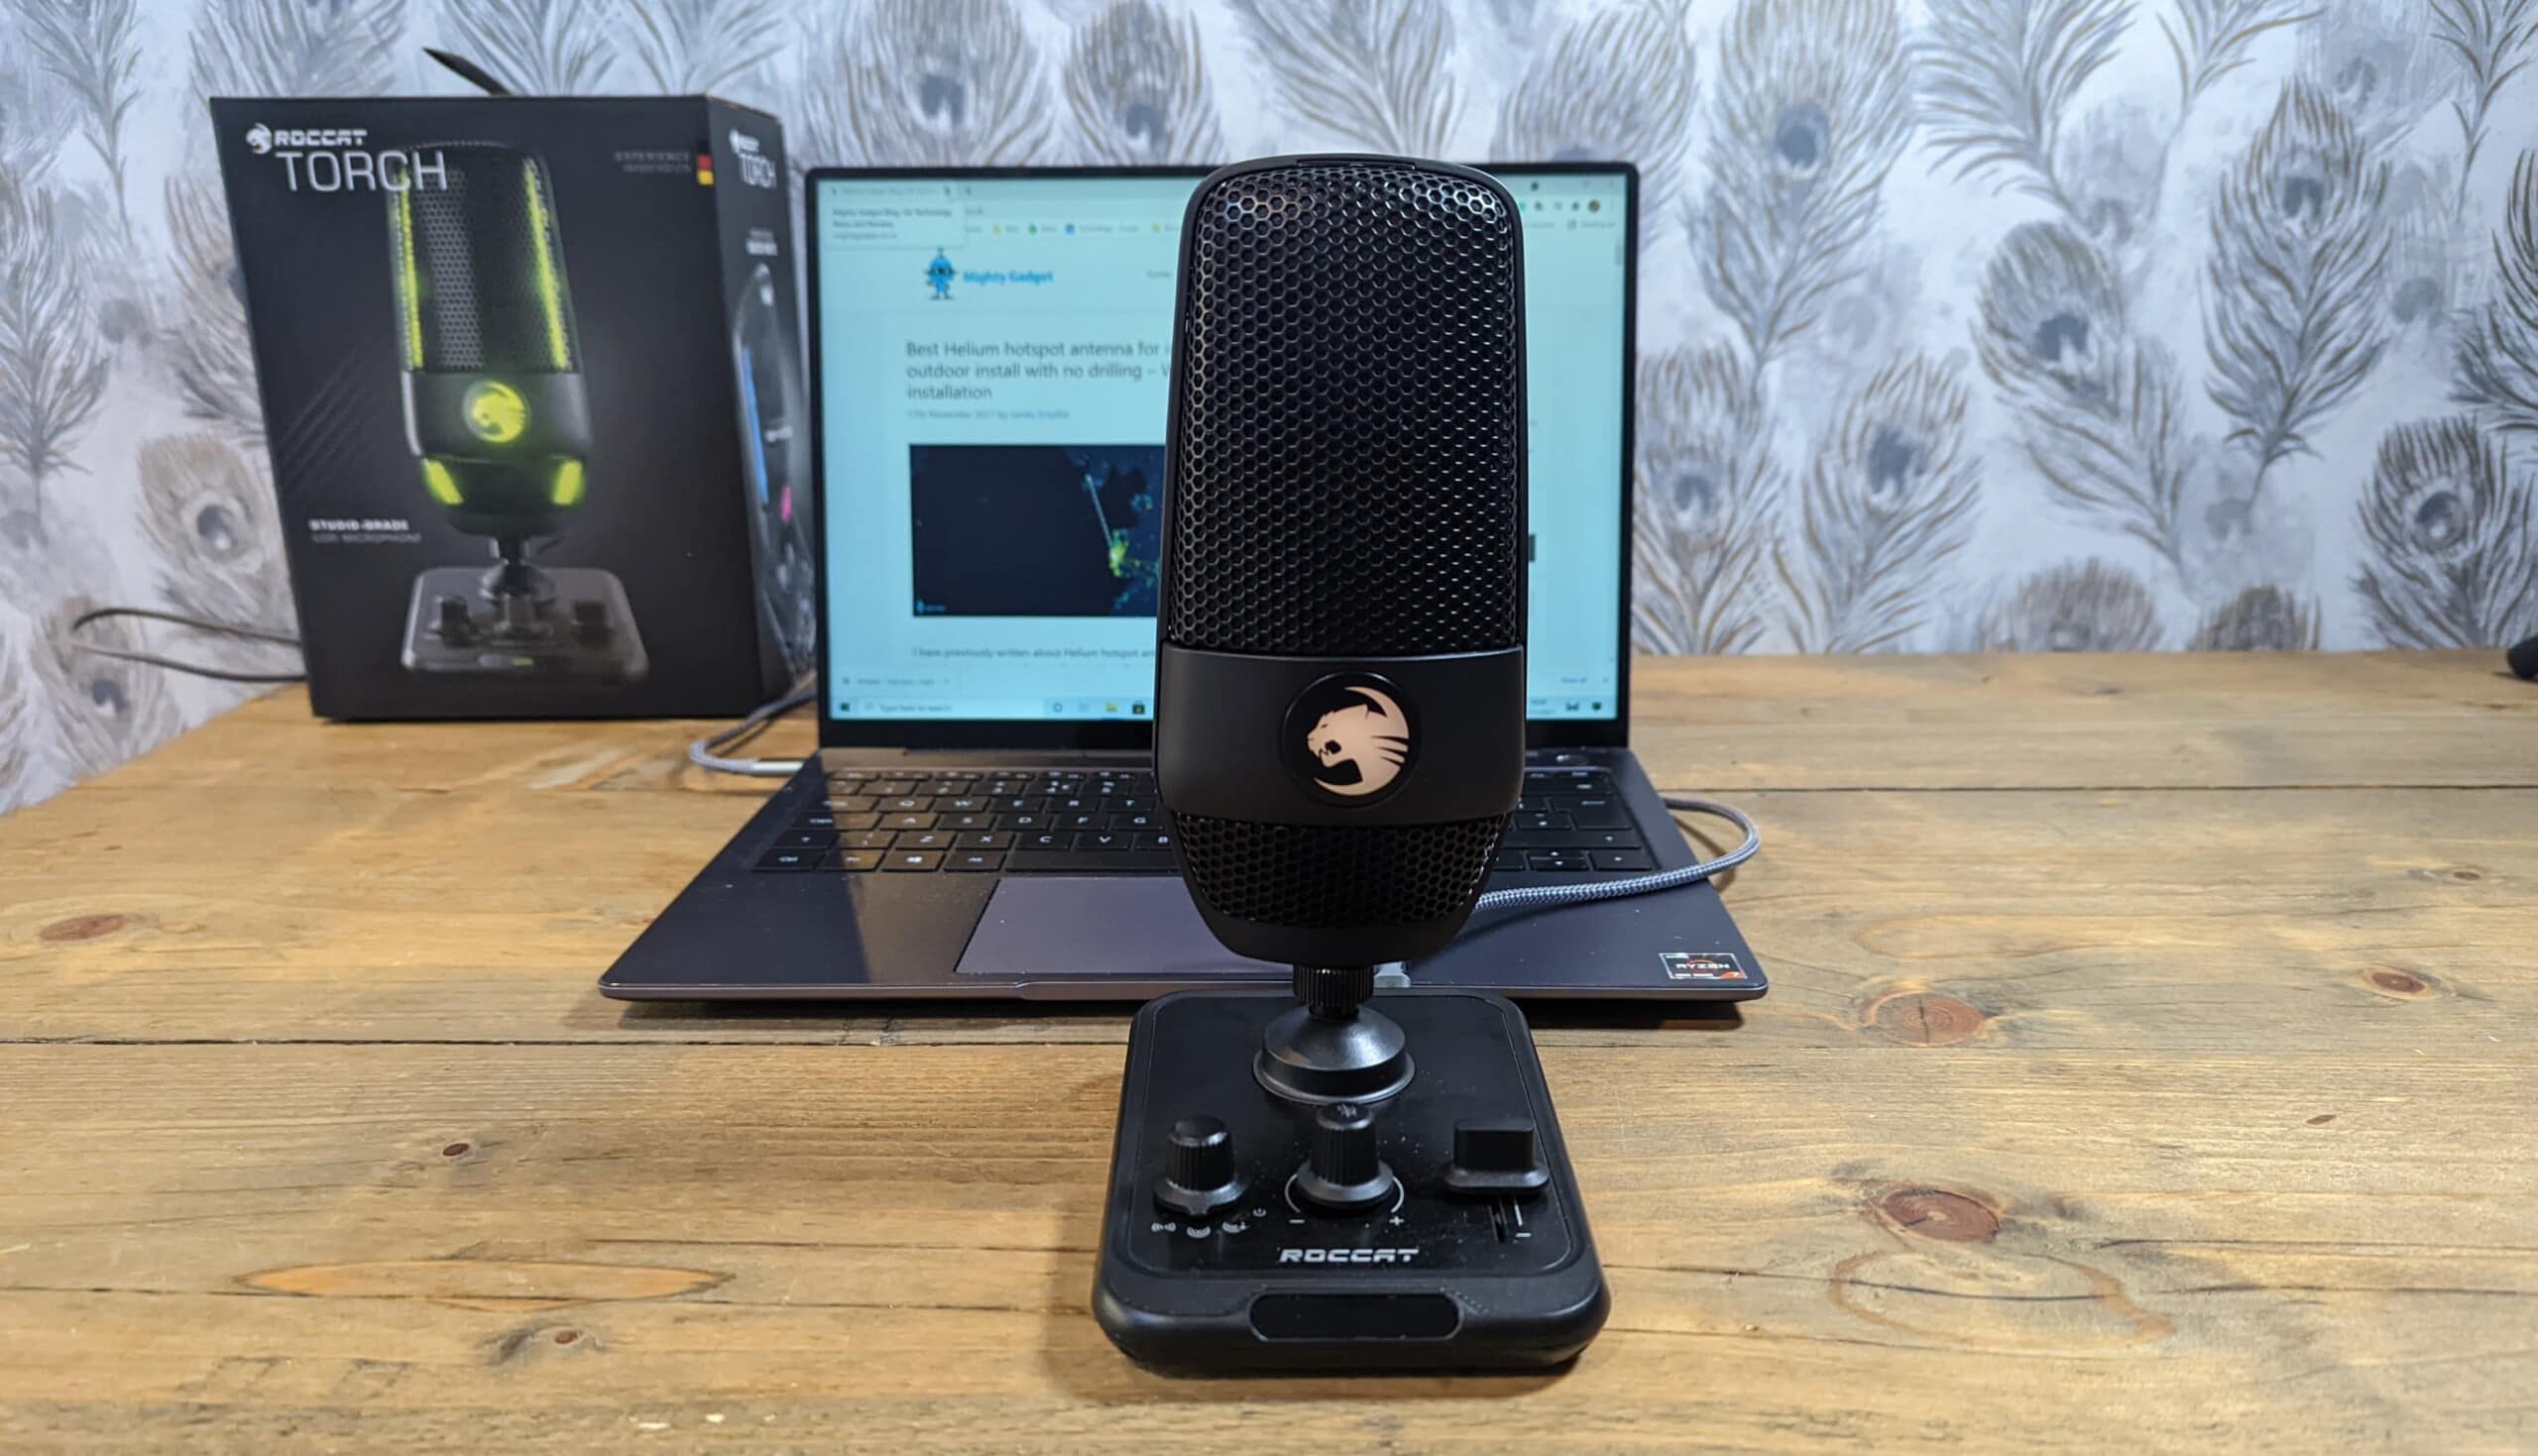 Roccat Torch USB Microphone Review scaled